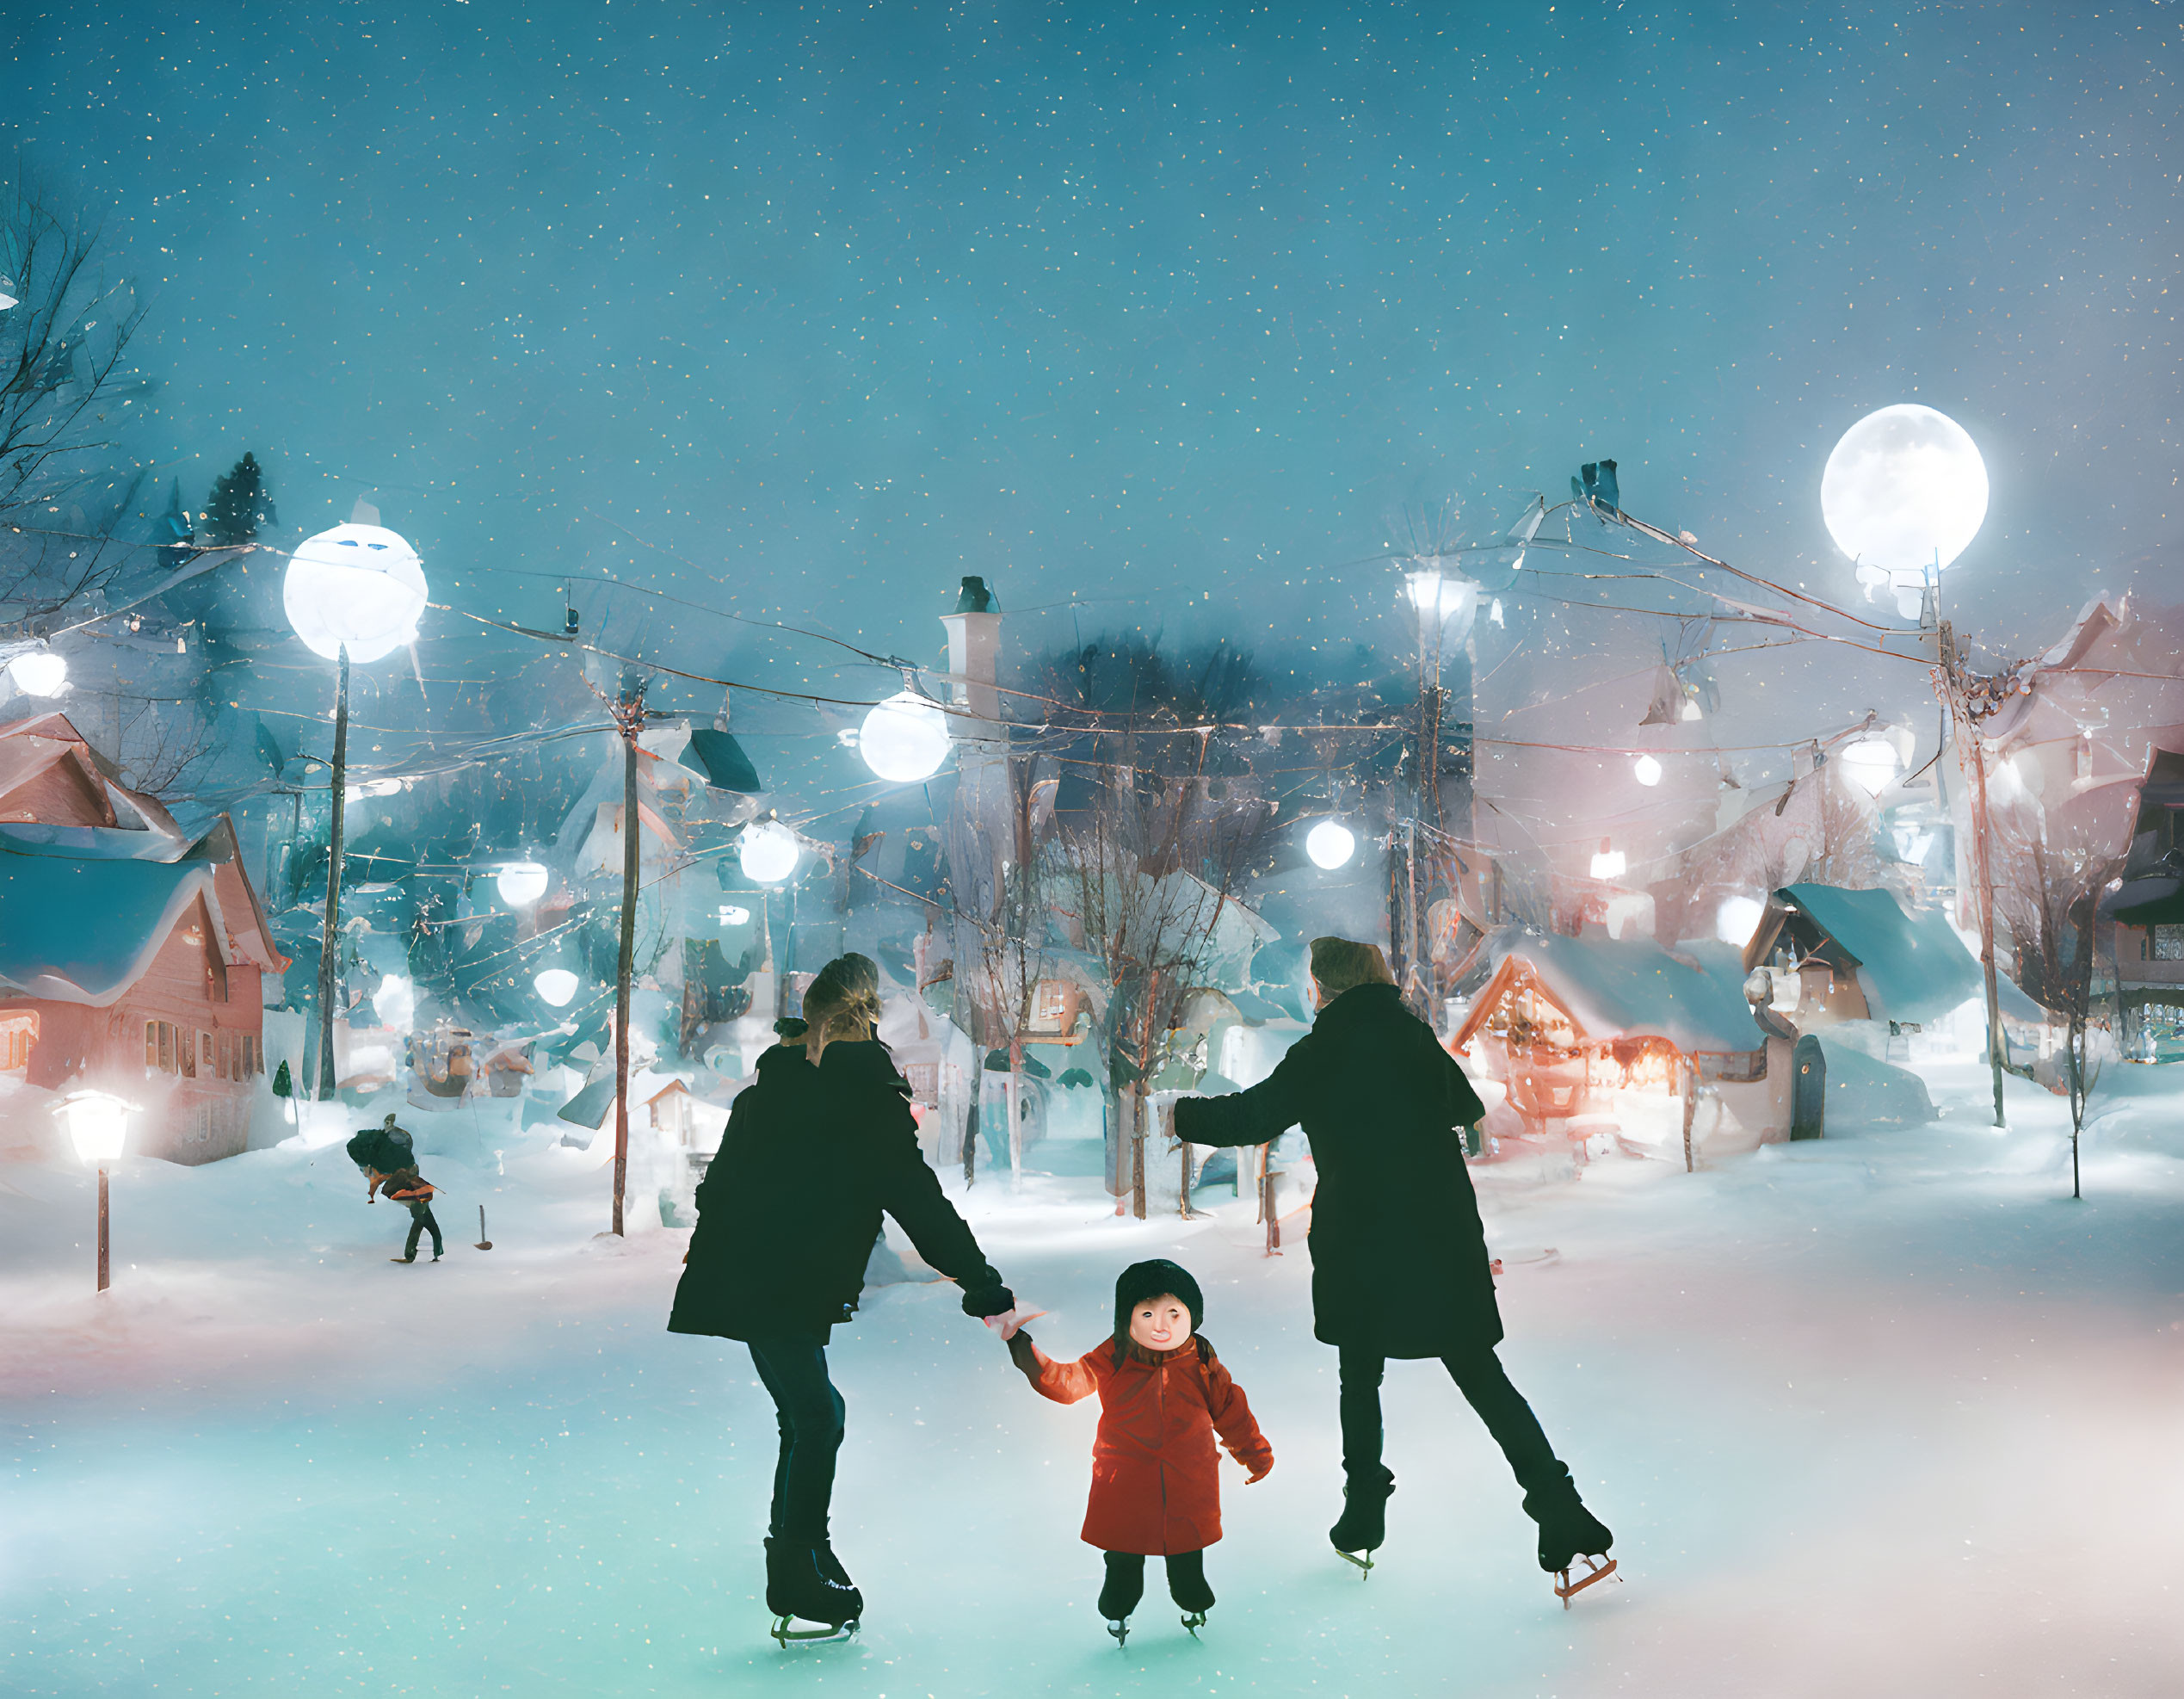 Family ice skating in snowy village with glowing street lamps